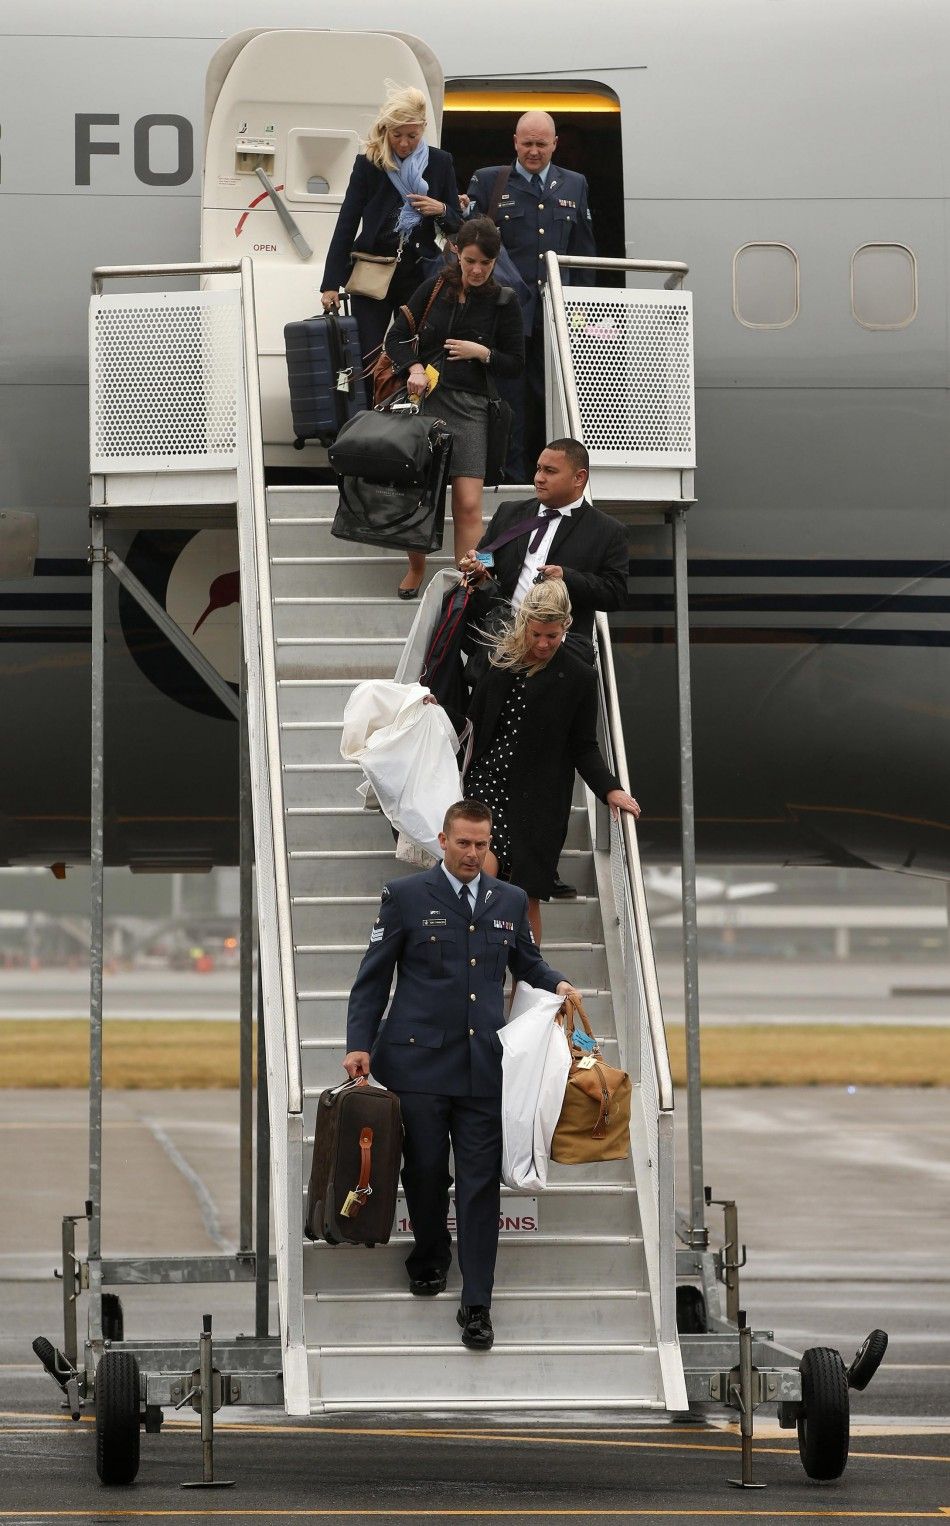 Members of the Royal New Zealand Airforce and the royal household carry luggage from the royal plane after arriving in Wellington April 7, 2014. Britains Prince William and his wife Kate are undertaking a19-day official visit to New Zealand and Australia